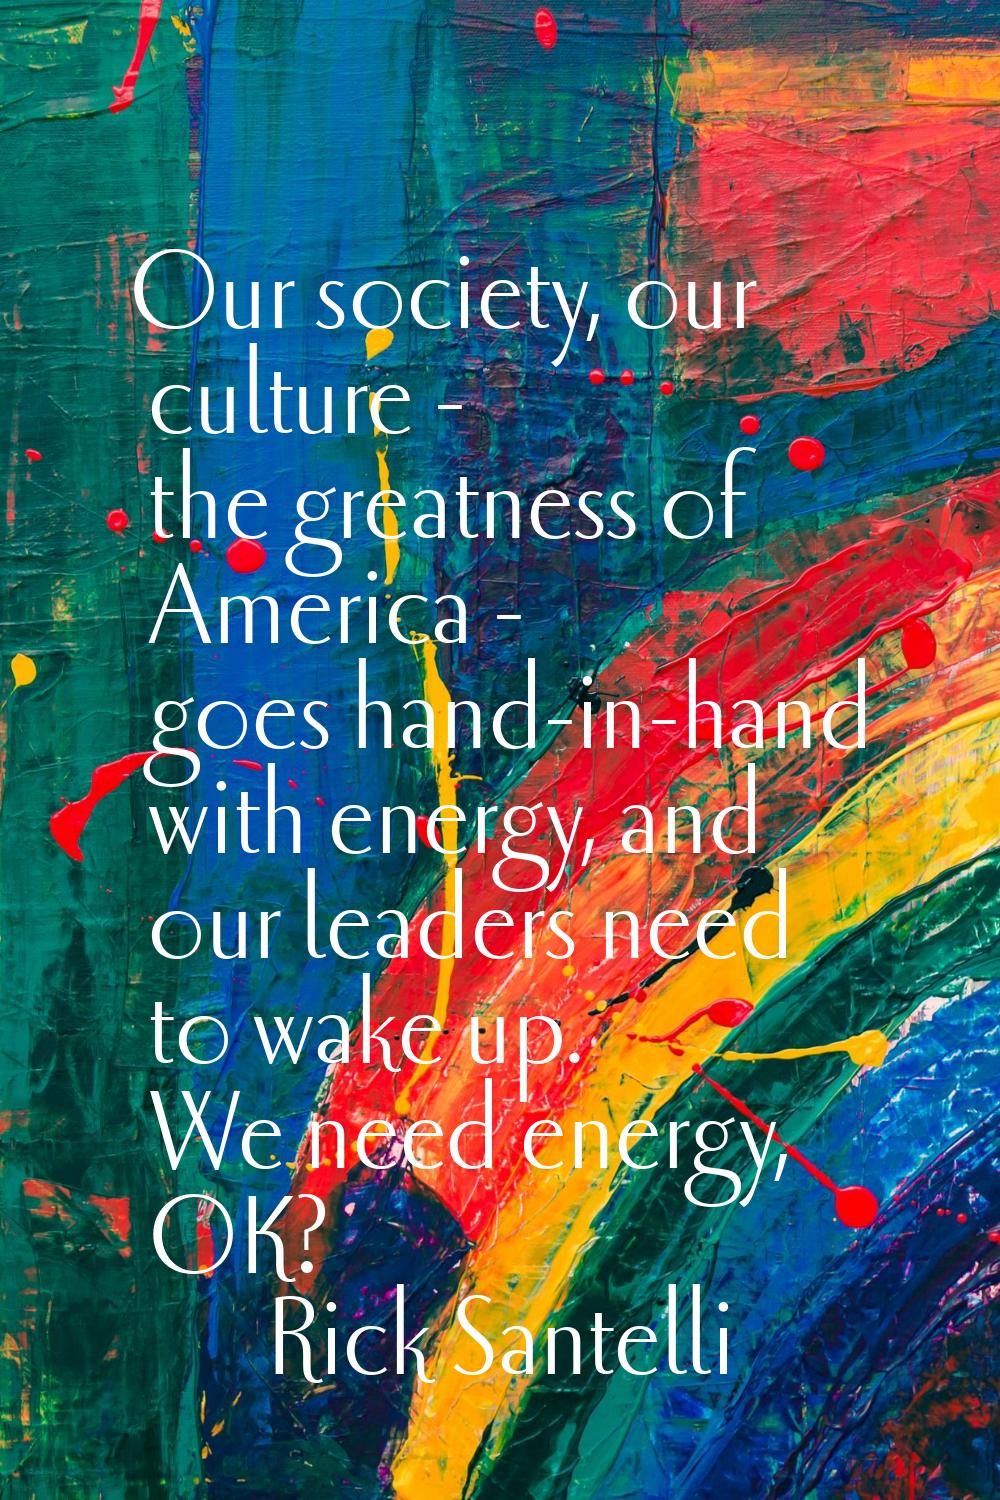 Our society, our culture - the greatness of America - goes hand-in-hand with energy, and our leader